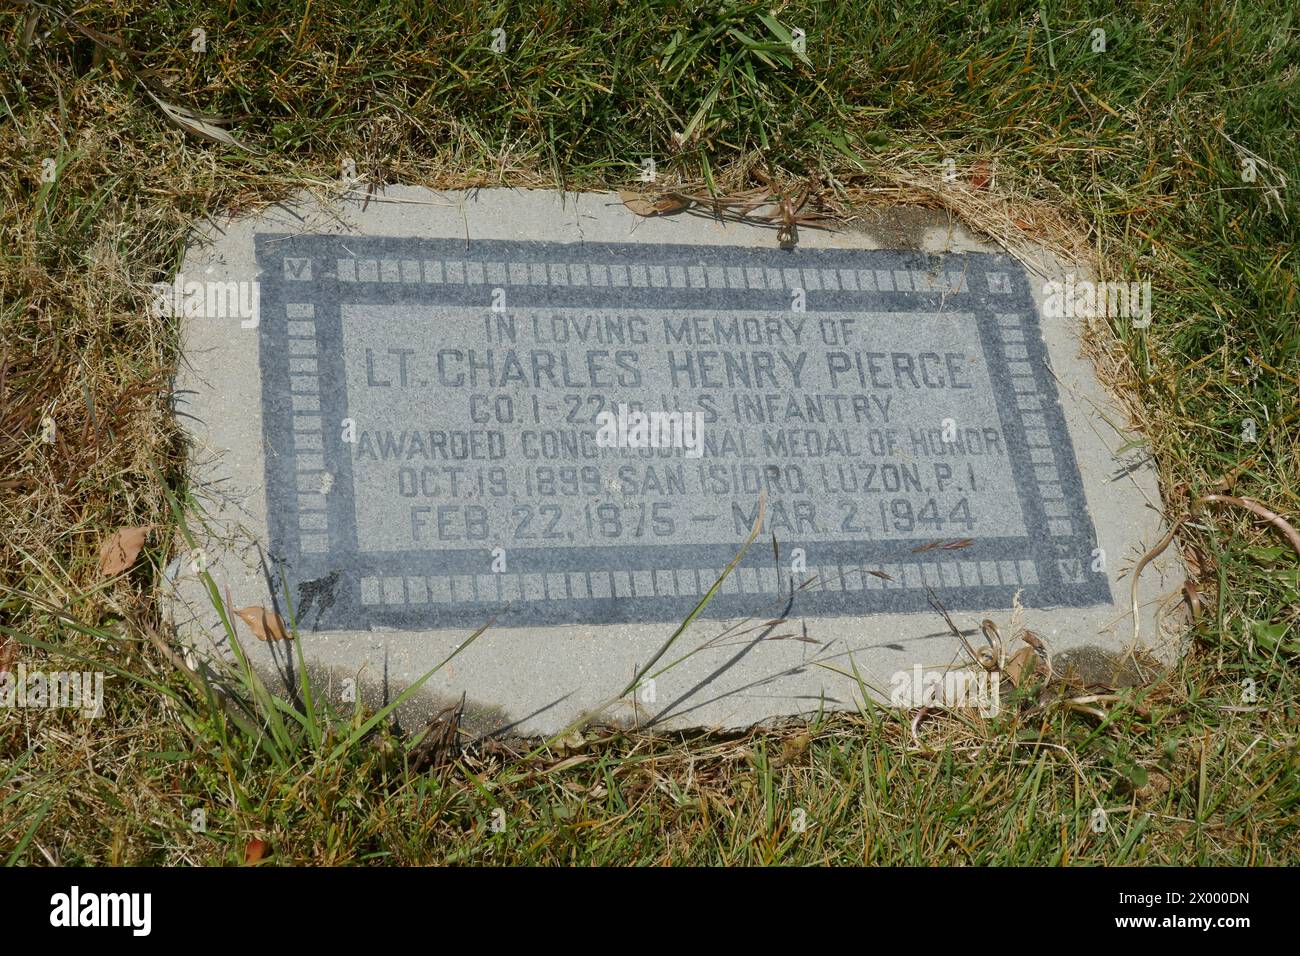 North Hollywood, California, USA 5th April 2024 Philippine Insurrection Medal of Honor Recipient Charles Henry Pierce Grave at Pierce Brothers Valhalla Memorial Park on April 5, 2024 in North Hollywood, California, USA. Photo by Barry King/Alamy Stock Photo Stock Photo